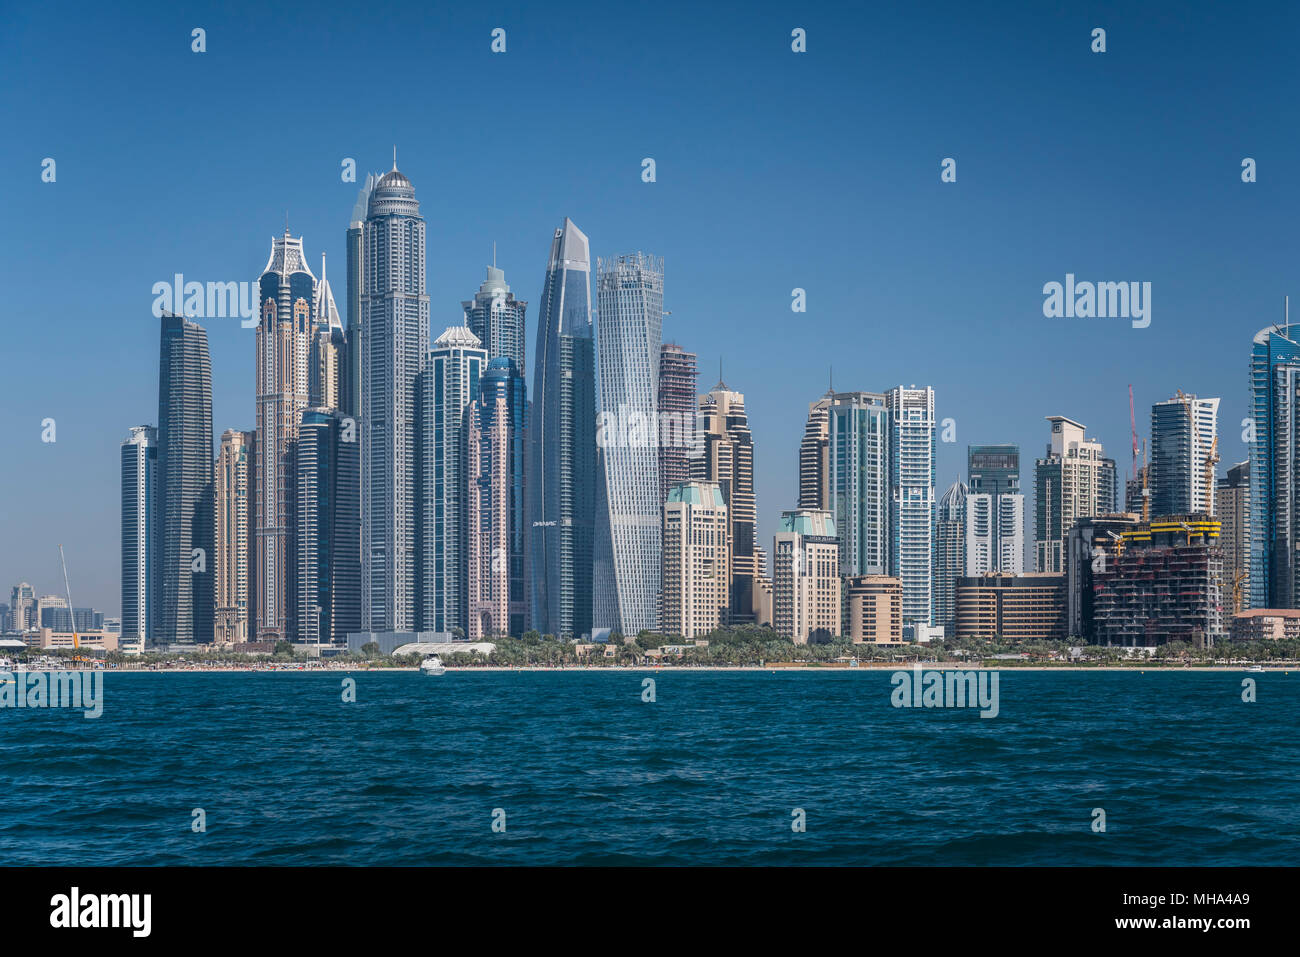 An offshore view of the marina from the Persian Gulf in Dubai, UAE, Middle East. Stock Photo